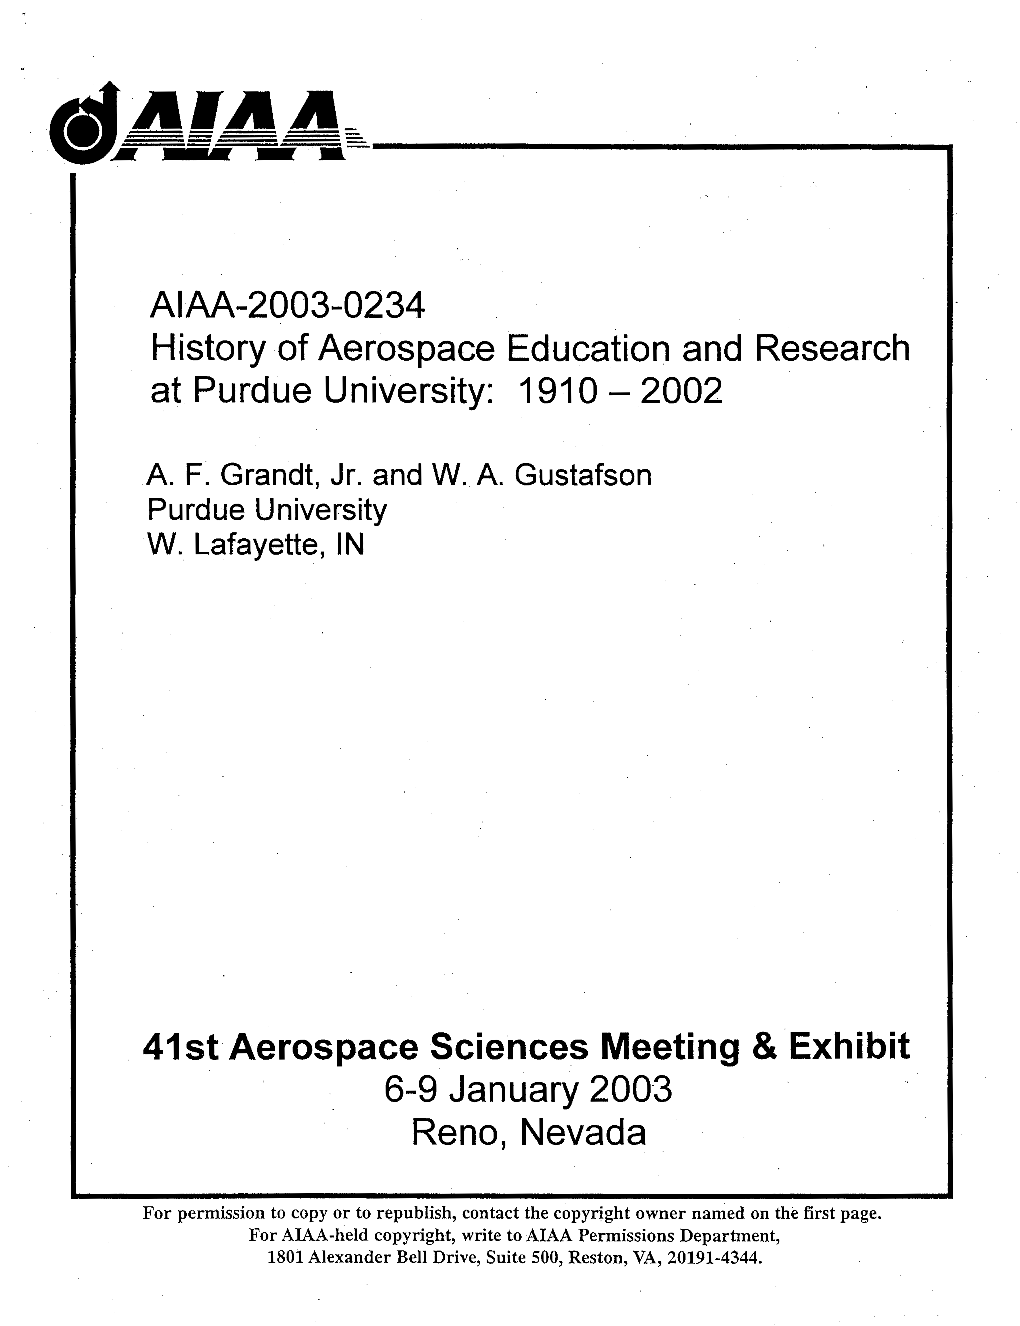 History of Aerospace Education and Research at Purdue University: 1910 - 2002